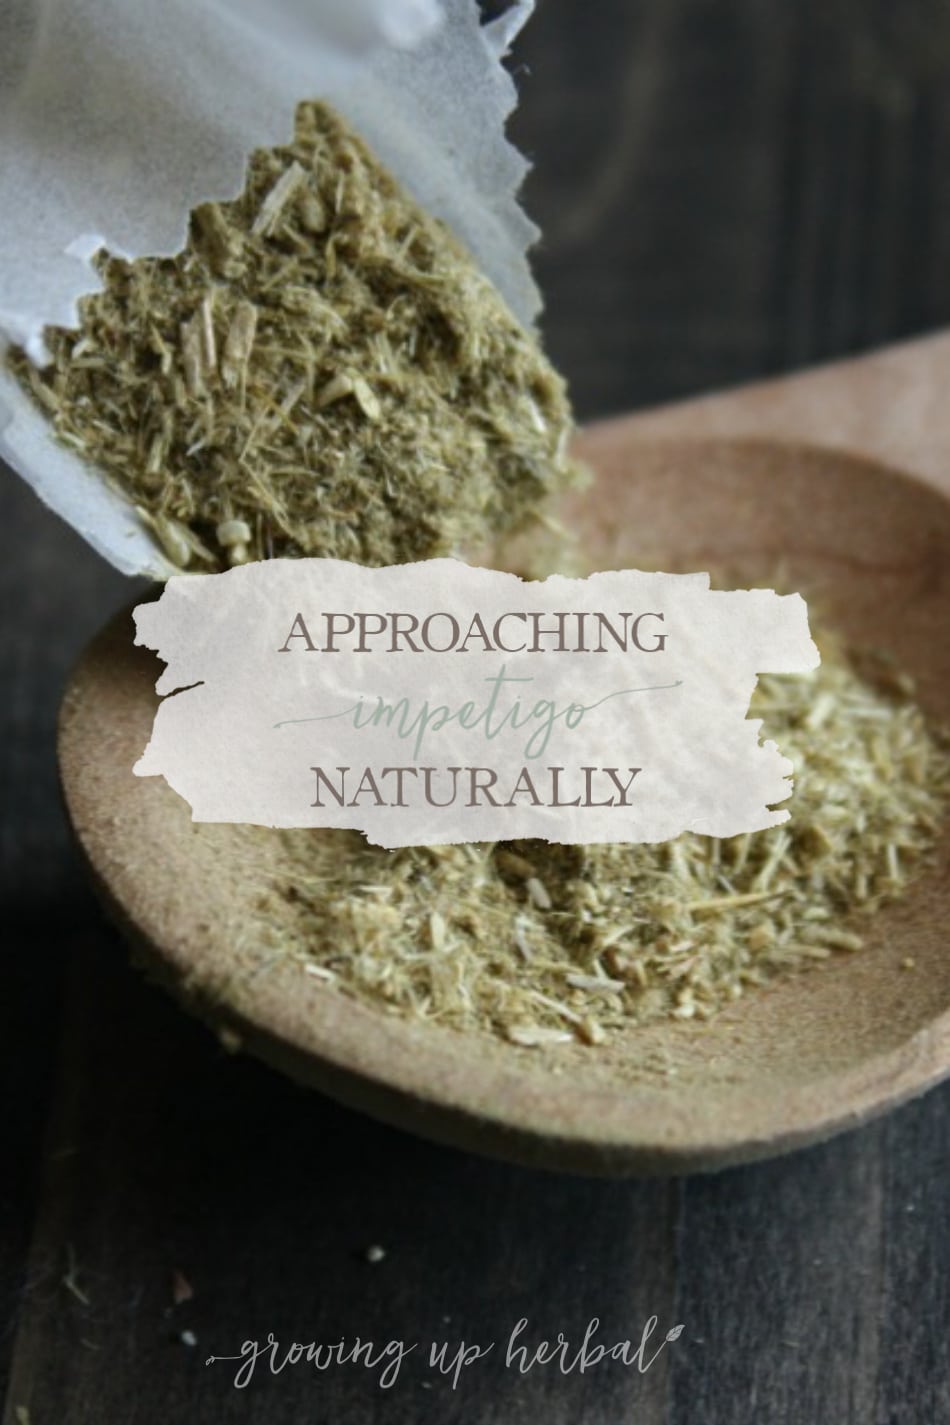 Approaching Impetigo Naturally: A True Story | Growing Up Herbal | Here’s a true story of how we managed an impetigo infection safely and naturally using herbs, essential oils, and other natural products.